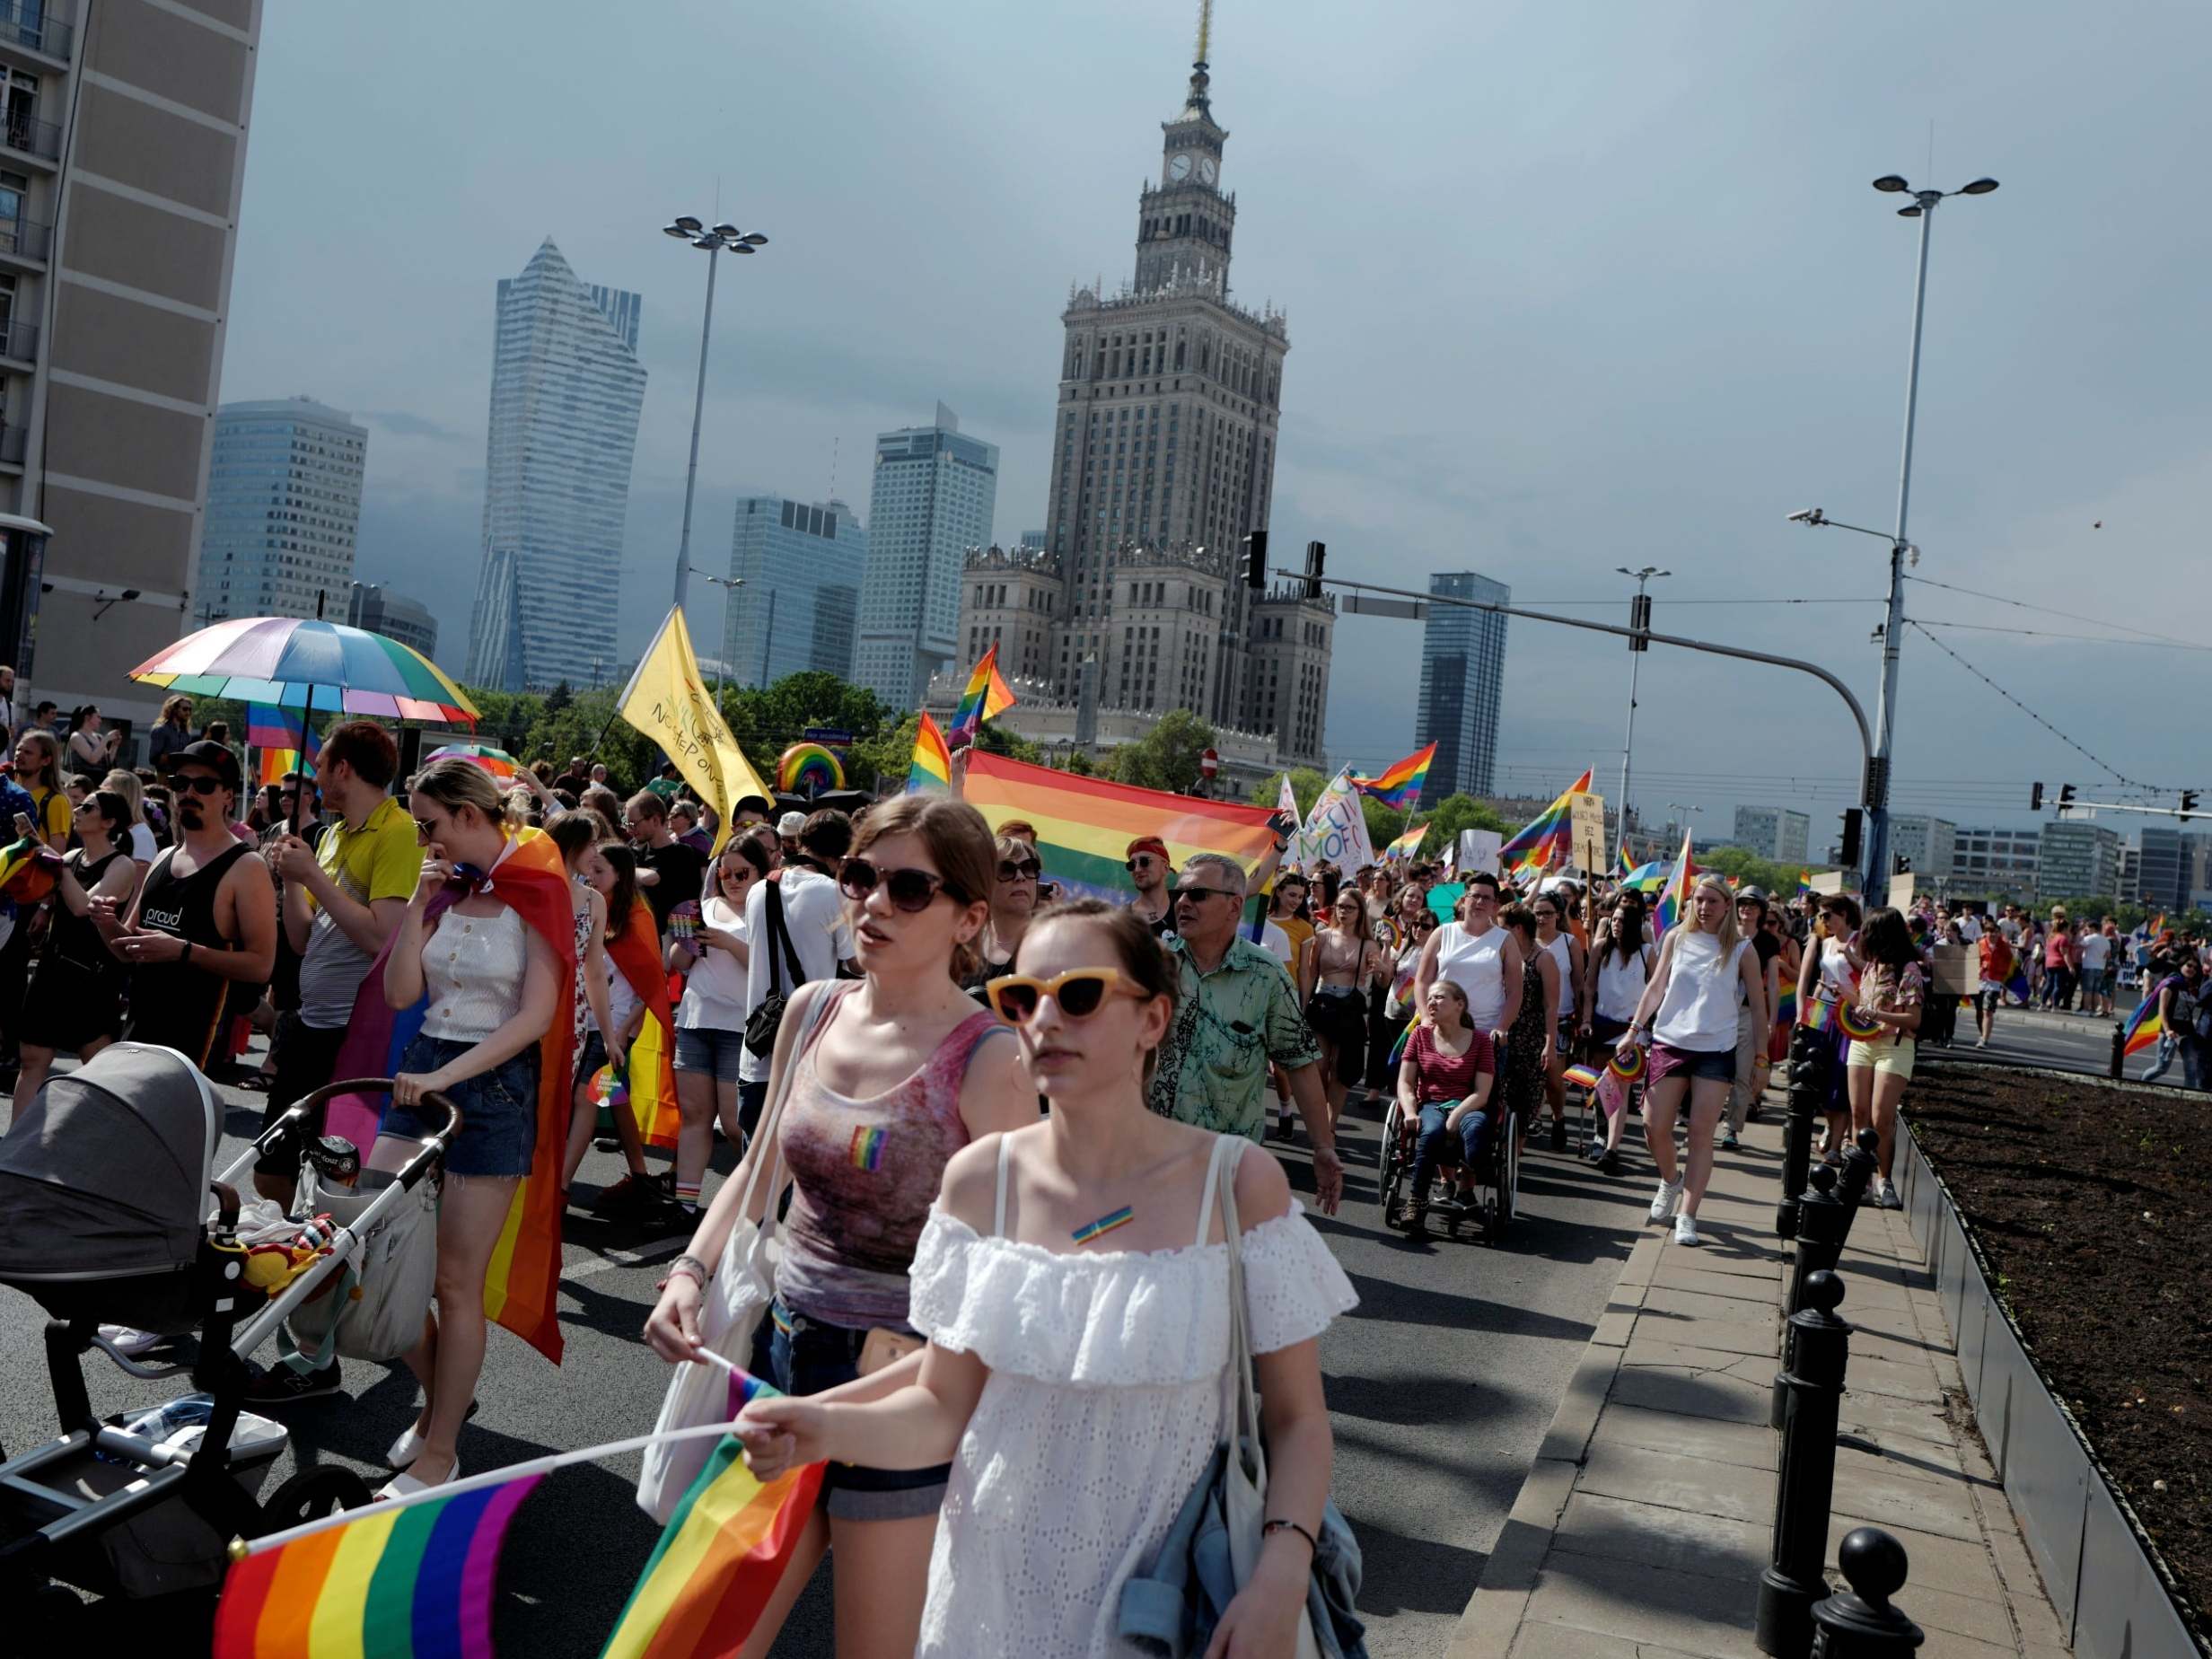 Participants take part at the 'Equality Parade' rally in support of the LGBT+ community in Warsaw